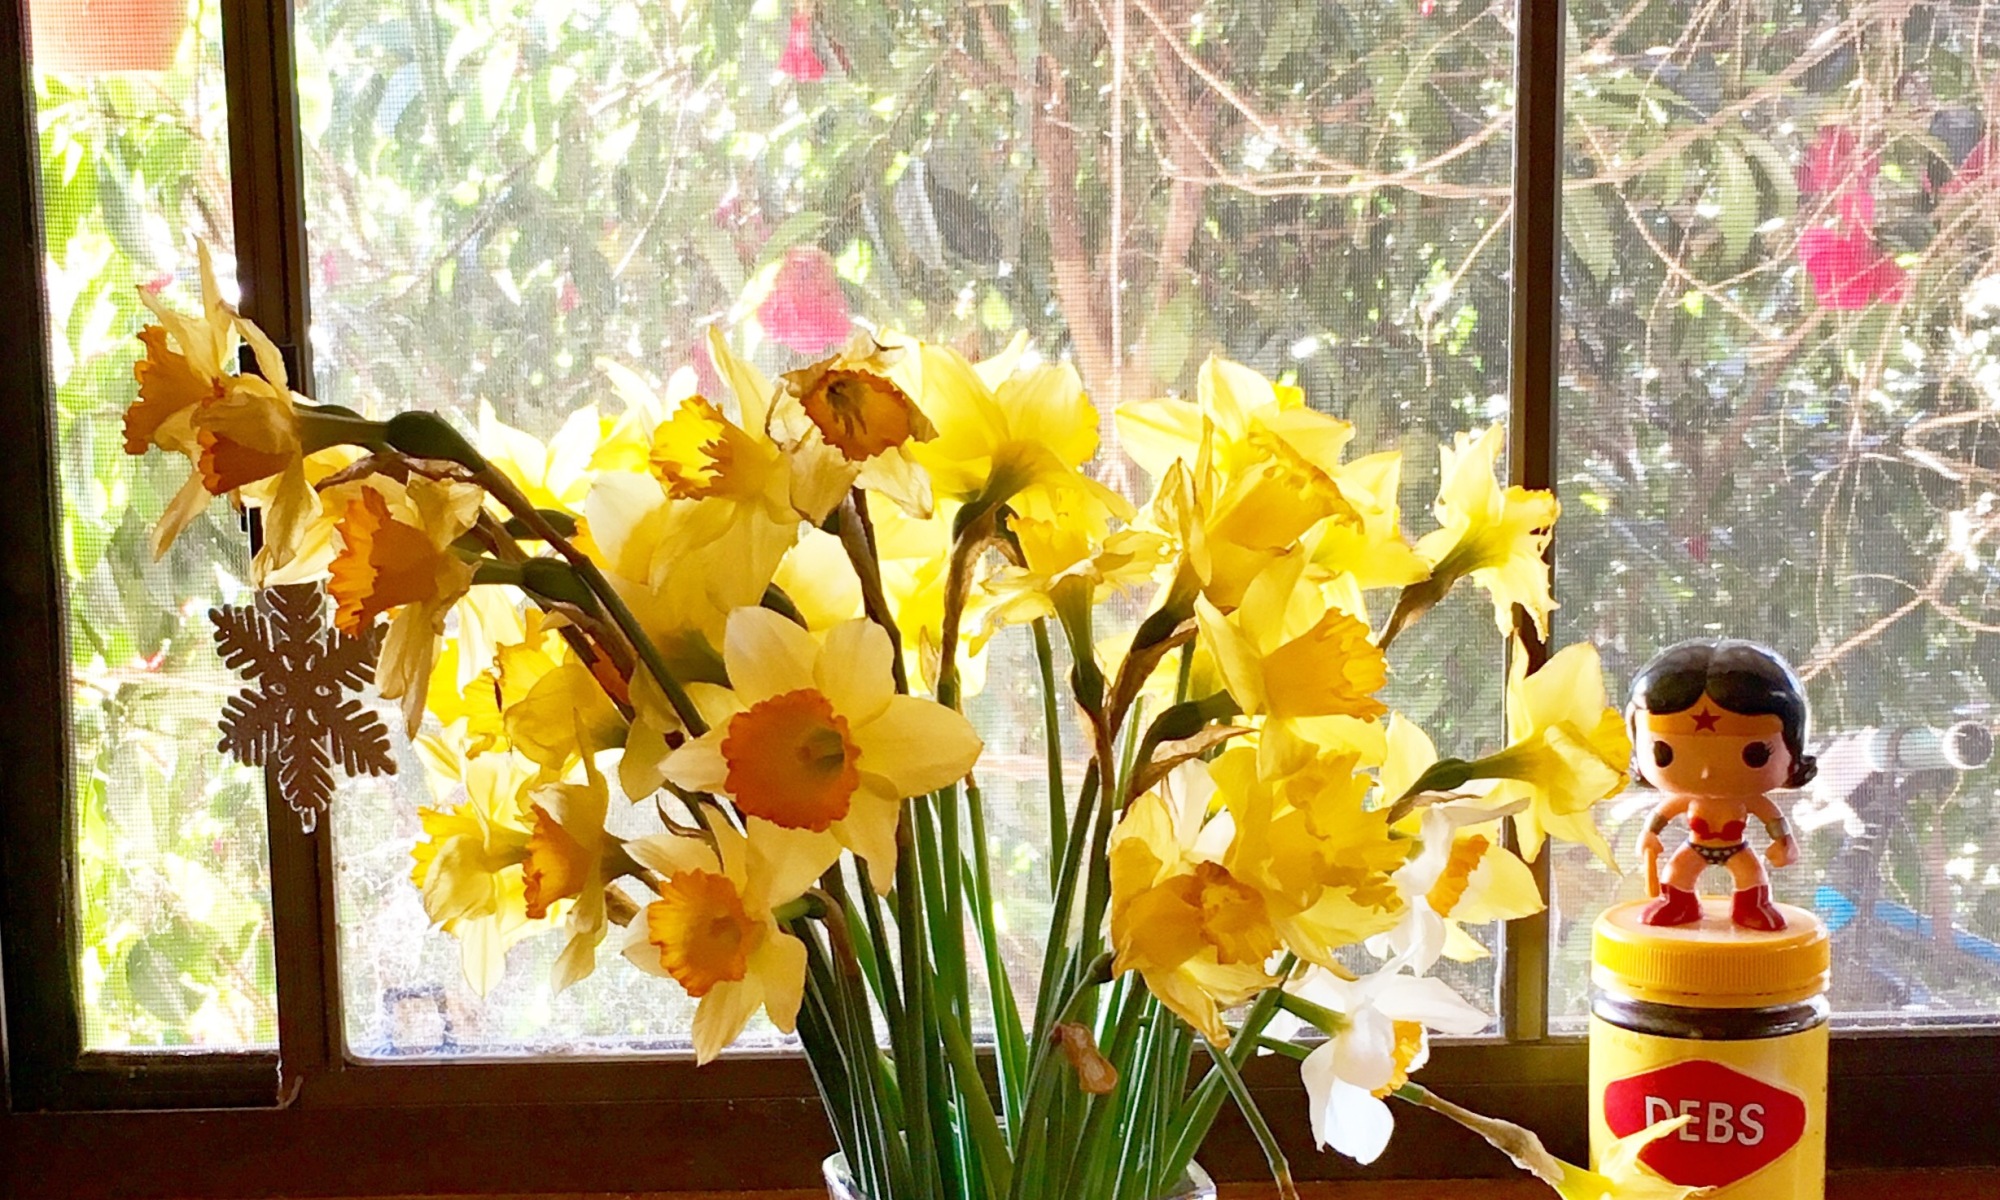 View through the window on a sunny spring day